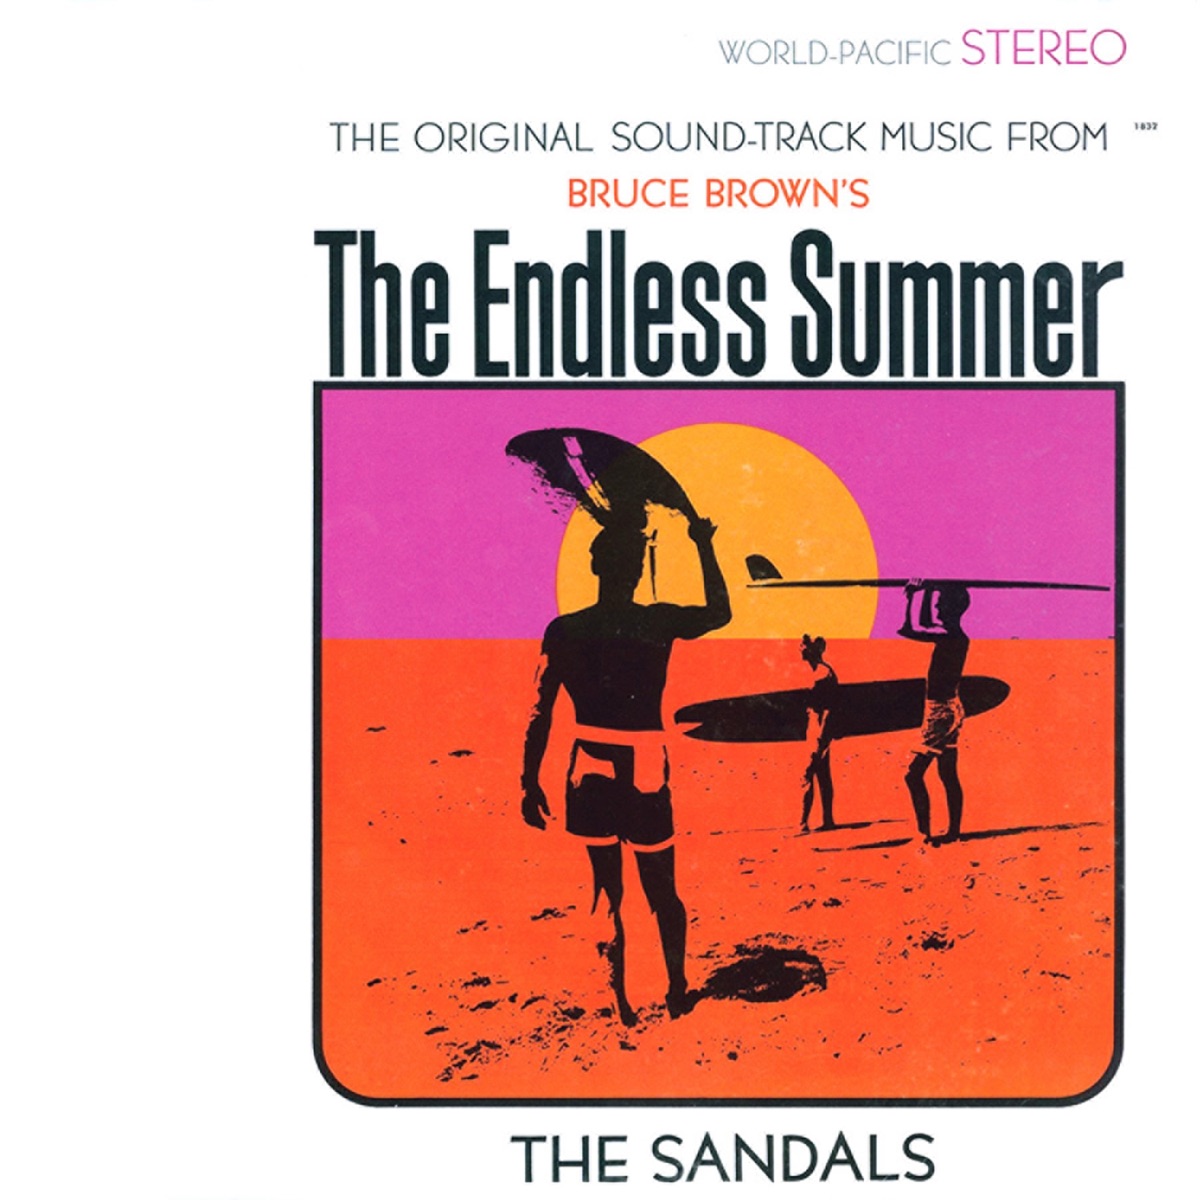 The Endless Summer (Original Soundtrack from the Motion Picture) - Album by  The Sandals - Apple Music